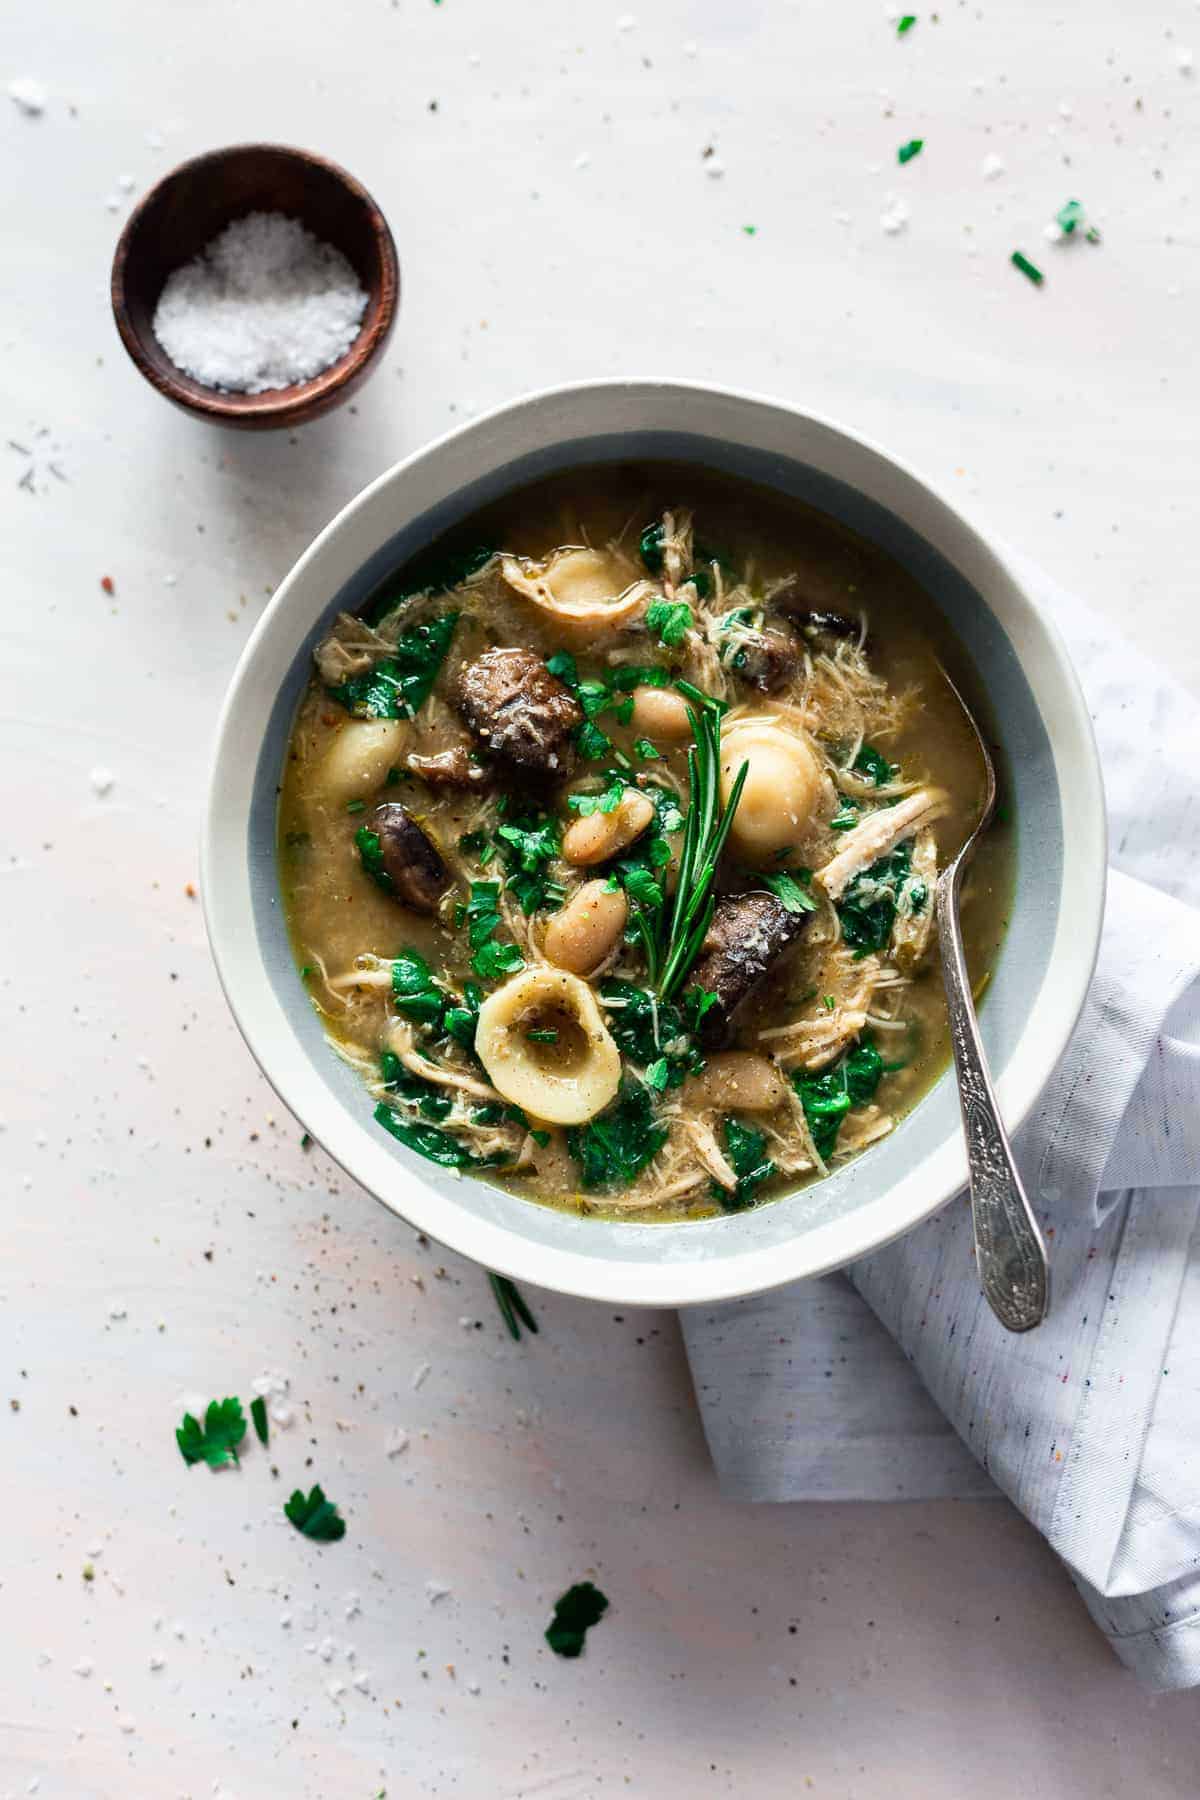 Flavorful and hearty, this Italian chicken and mushroom soup is warming to the soul and is totally easy to make a big batch of on a chilly night! Packed with flavor and delicious ingredients, you'll love this soup for fall and winter nights when all you want is something warm and comforting. #italiansoup #soup #chickensoup #mushroomsoup #souprecipes #italianrecipes